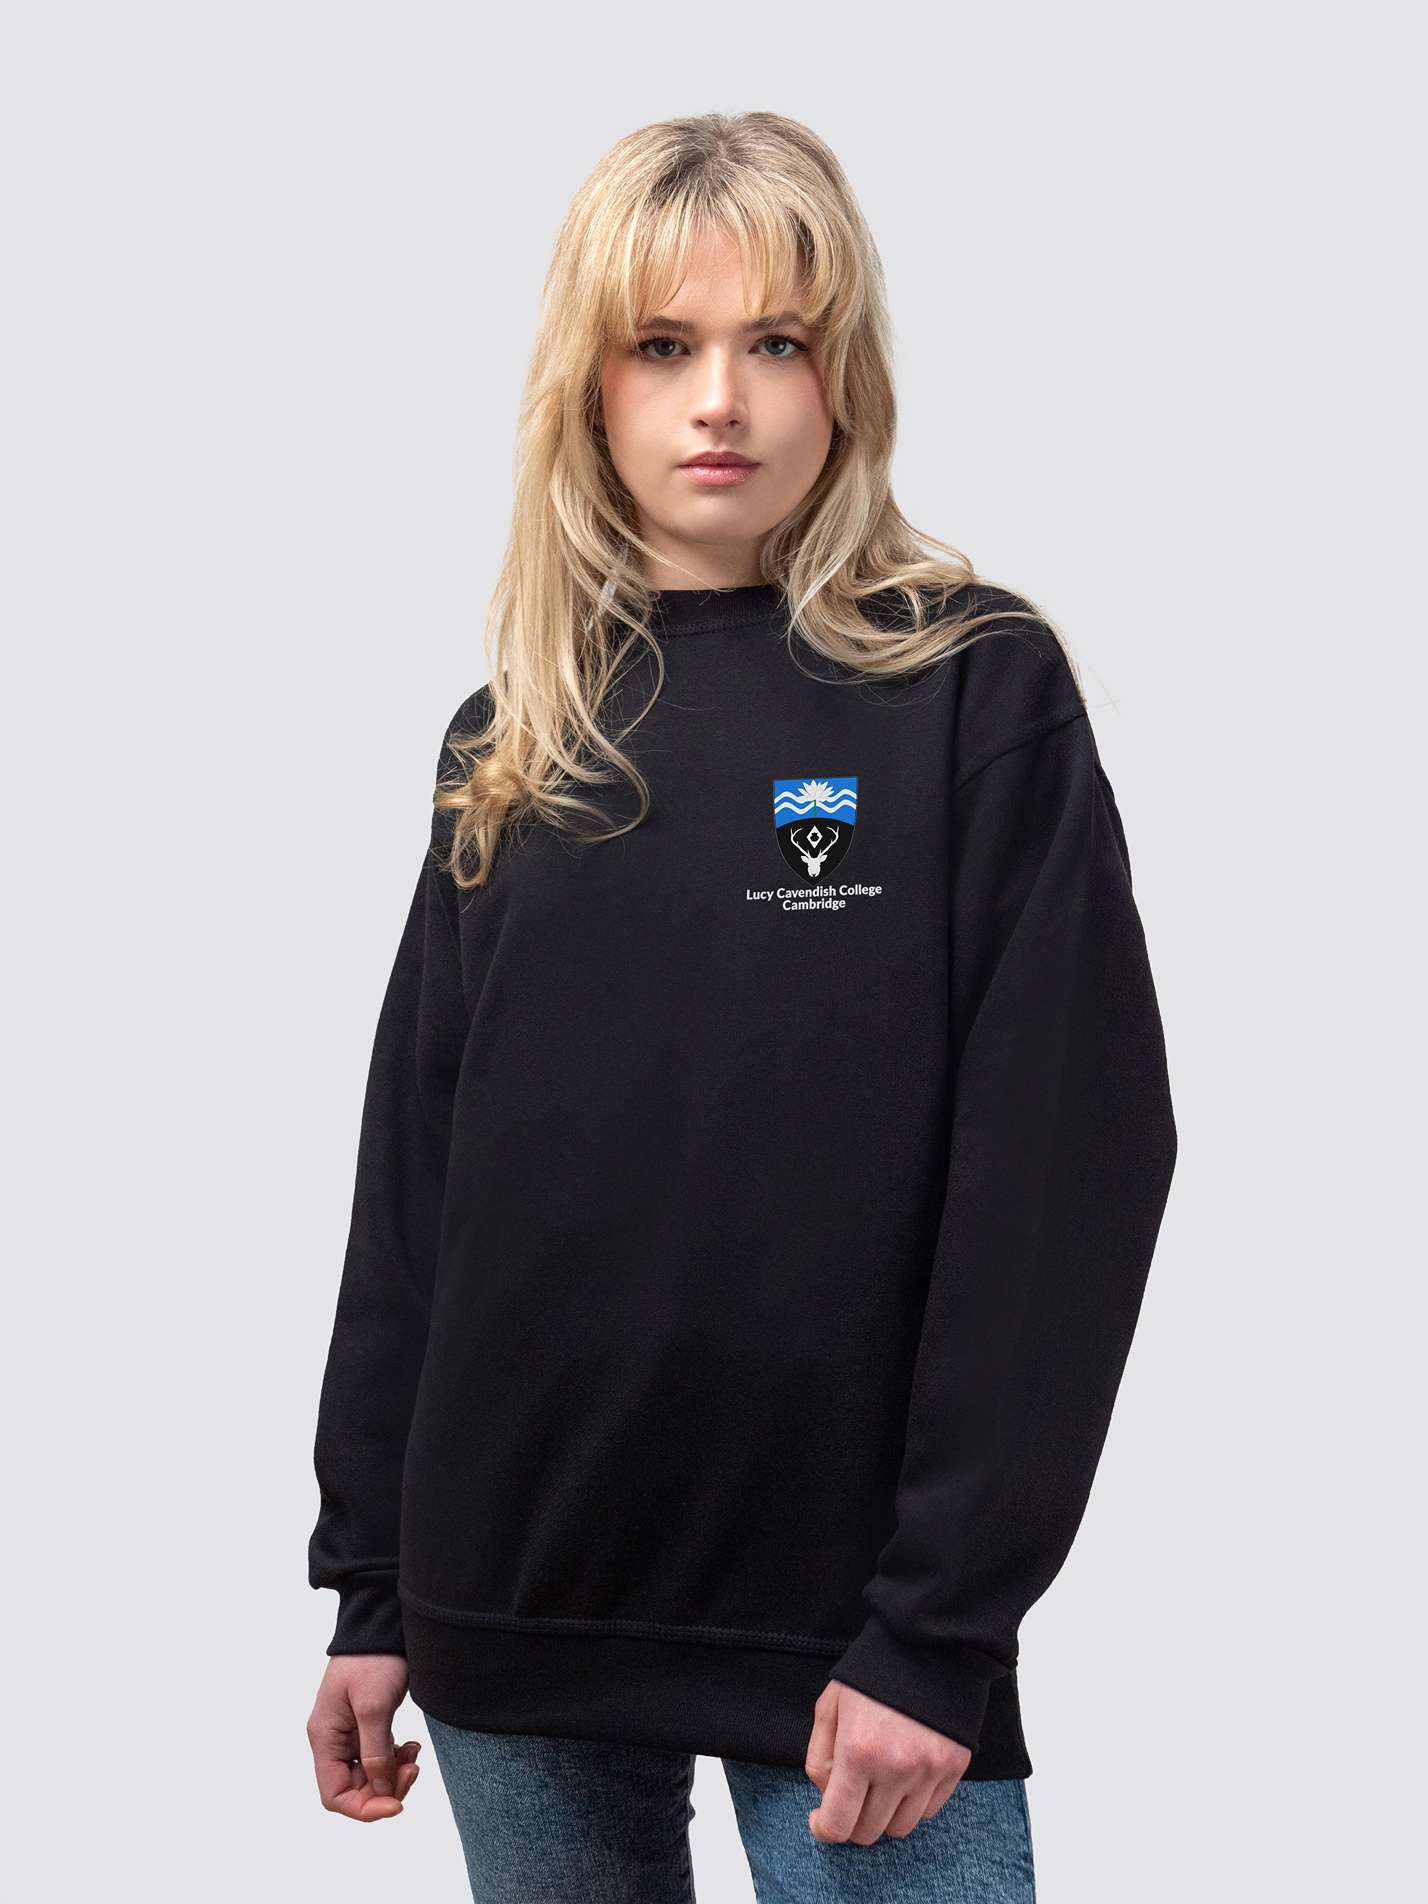 Lucy Cavendish crest on the front of a black, crew-neck sweatshirt